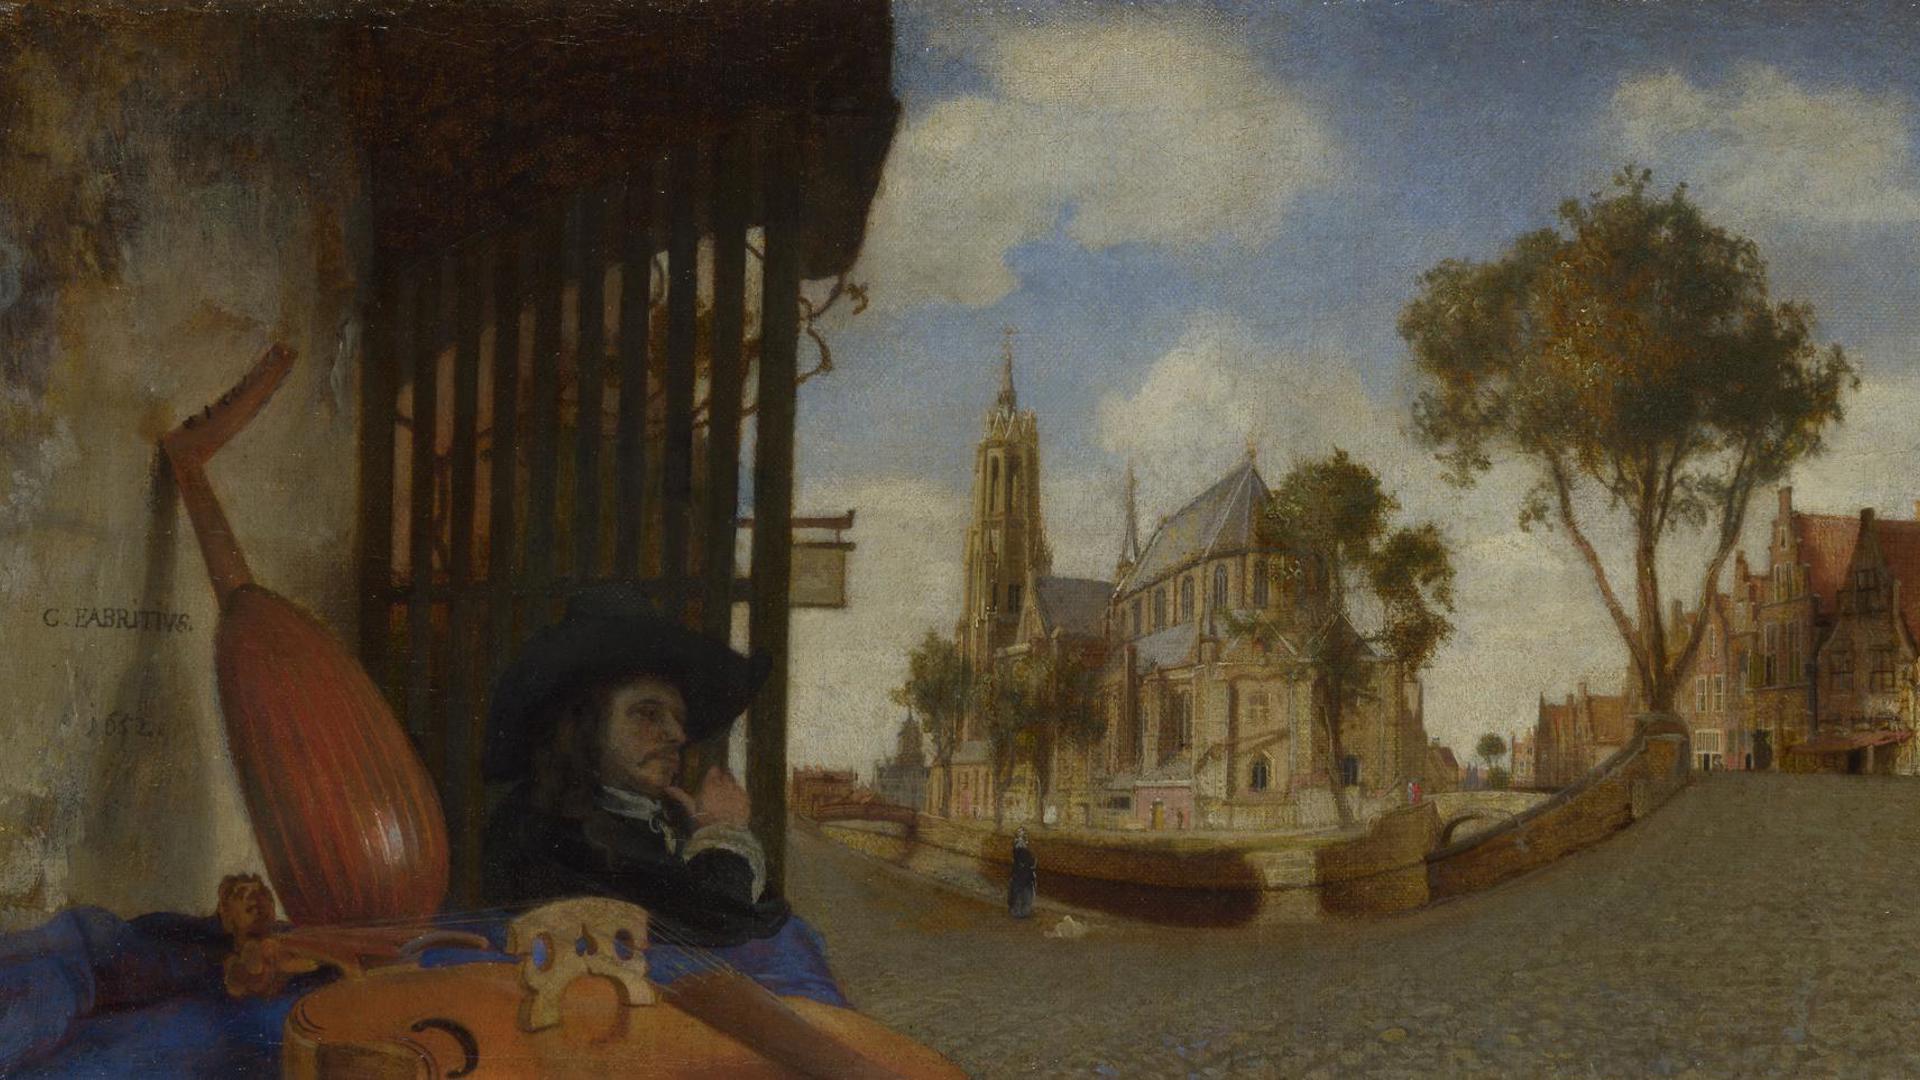 A View of Delft by Carel Fabritius